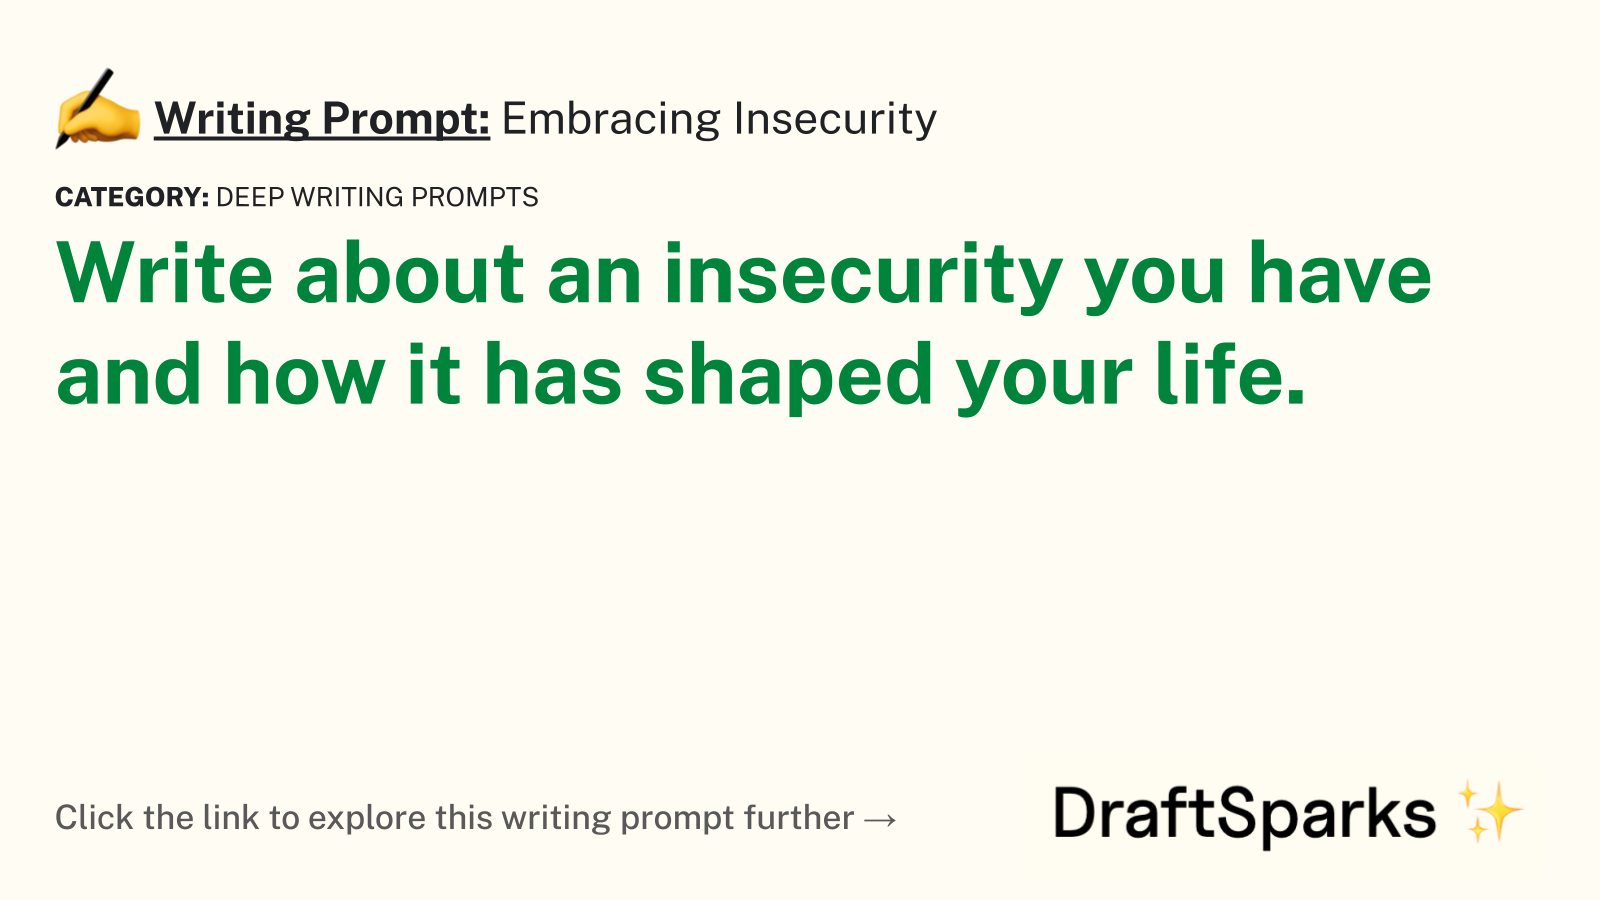 Embracing Insecurity